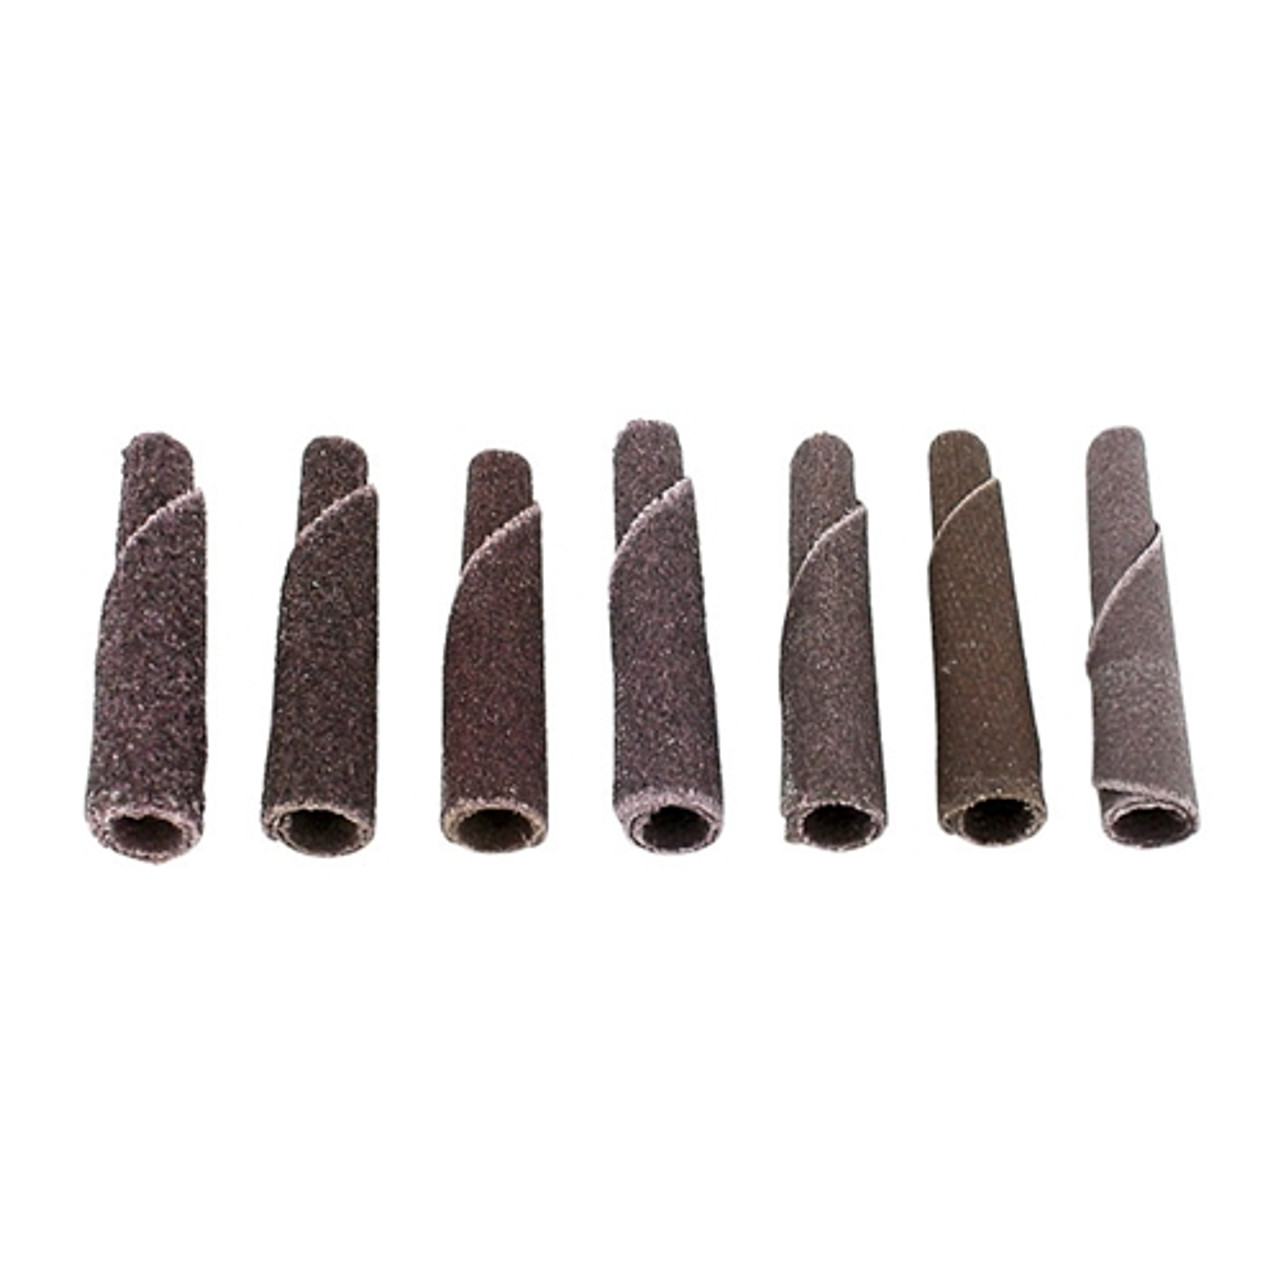 1-1/2" Tapered Cone Points - B-2, 240 Grit